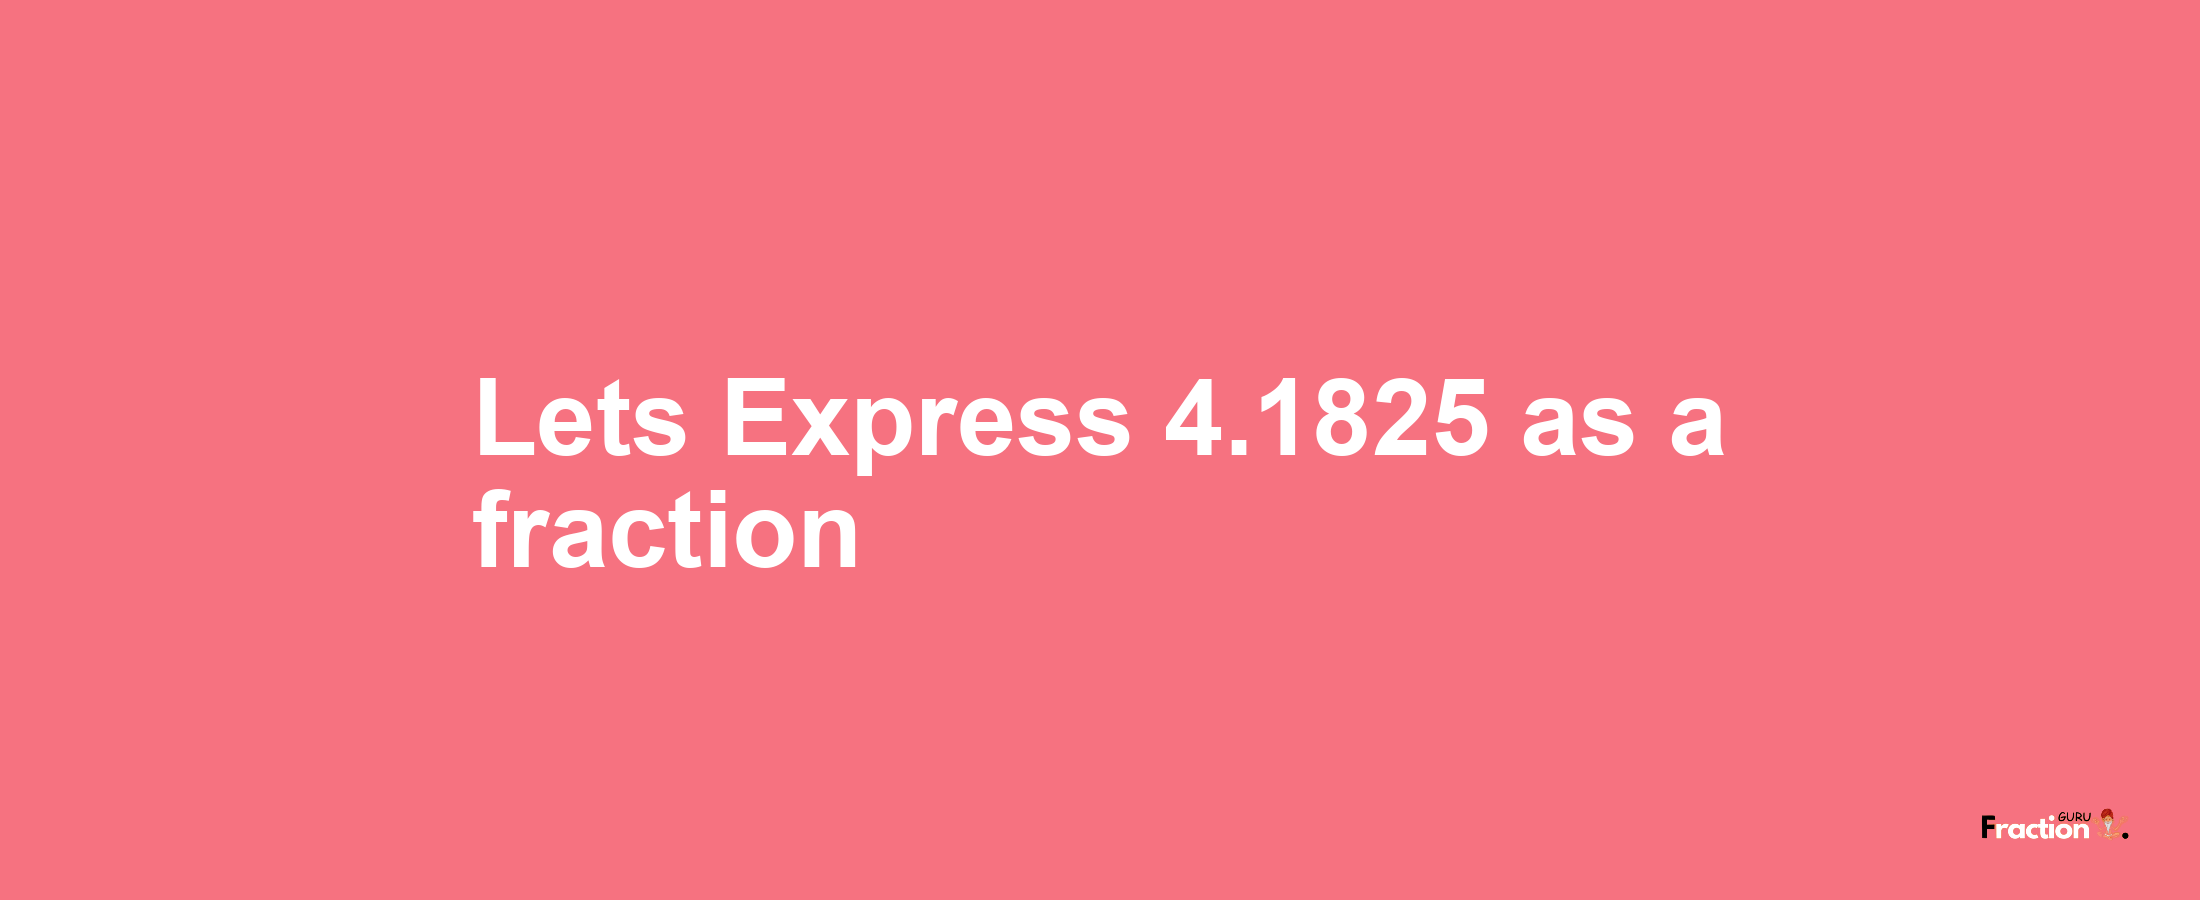 Lets Express 4.1825 as afraction